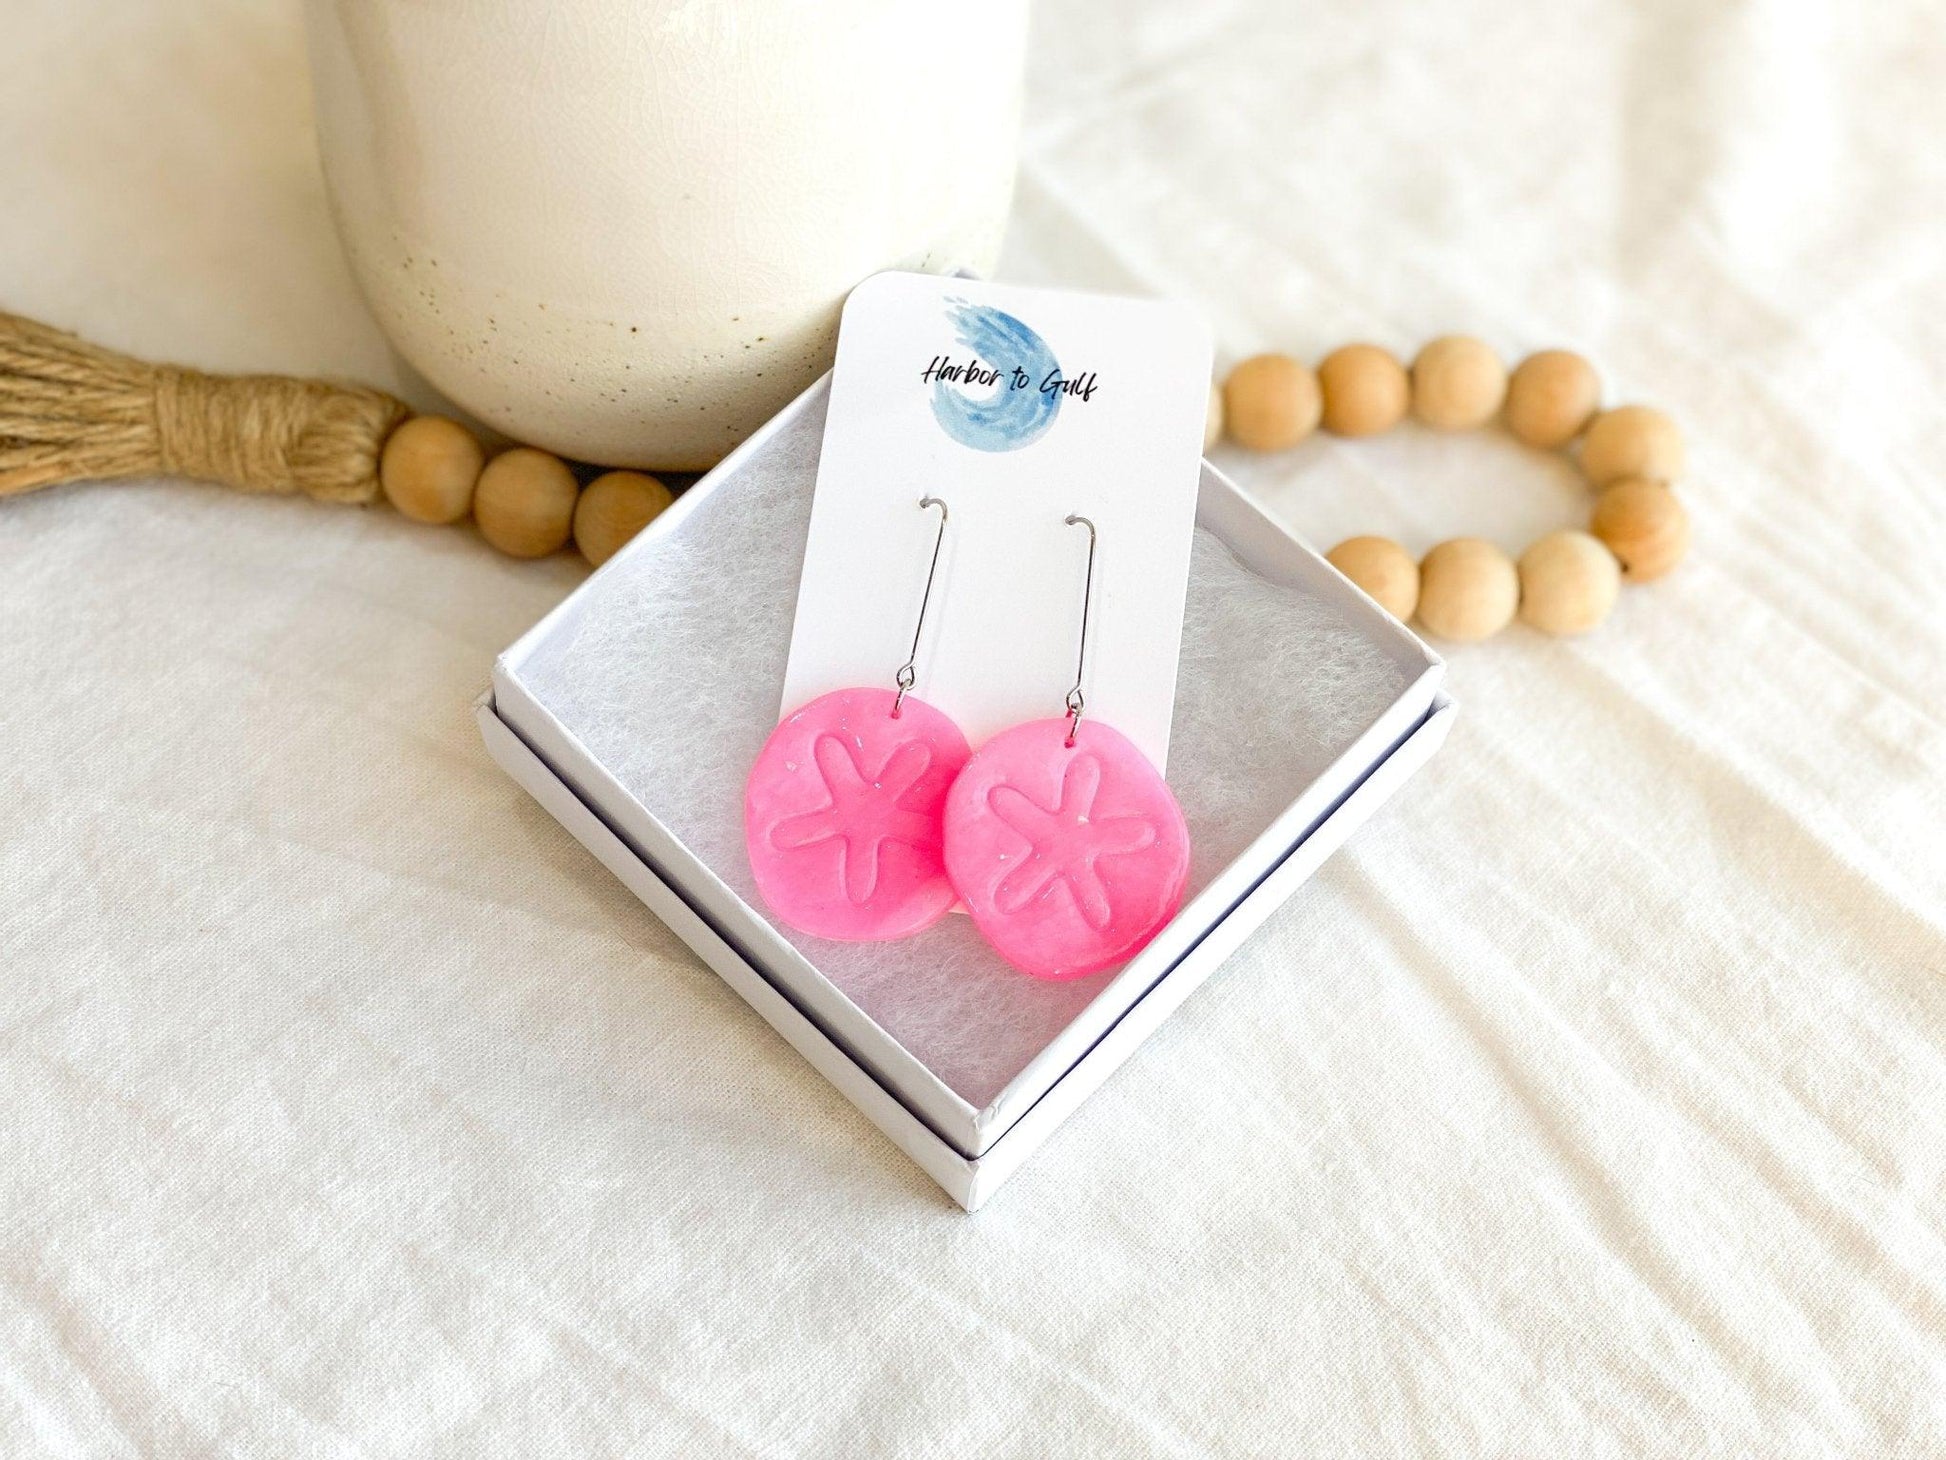 Handmade Bright Pink Sand Dollar Earrings with Long Surgical Steel Ear Wires on Harbor to Gulf Earring Card in White Gift Box